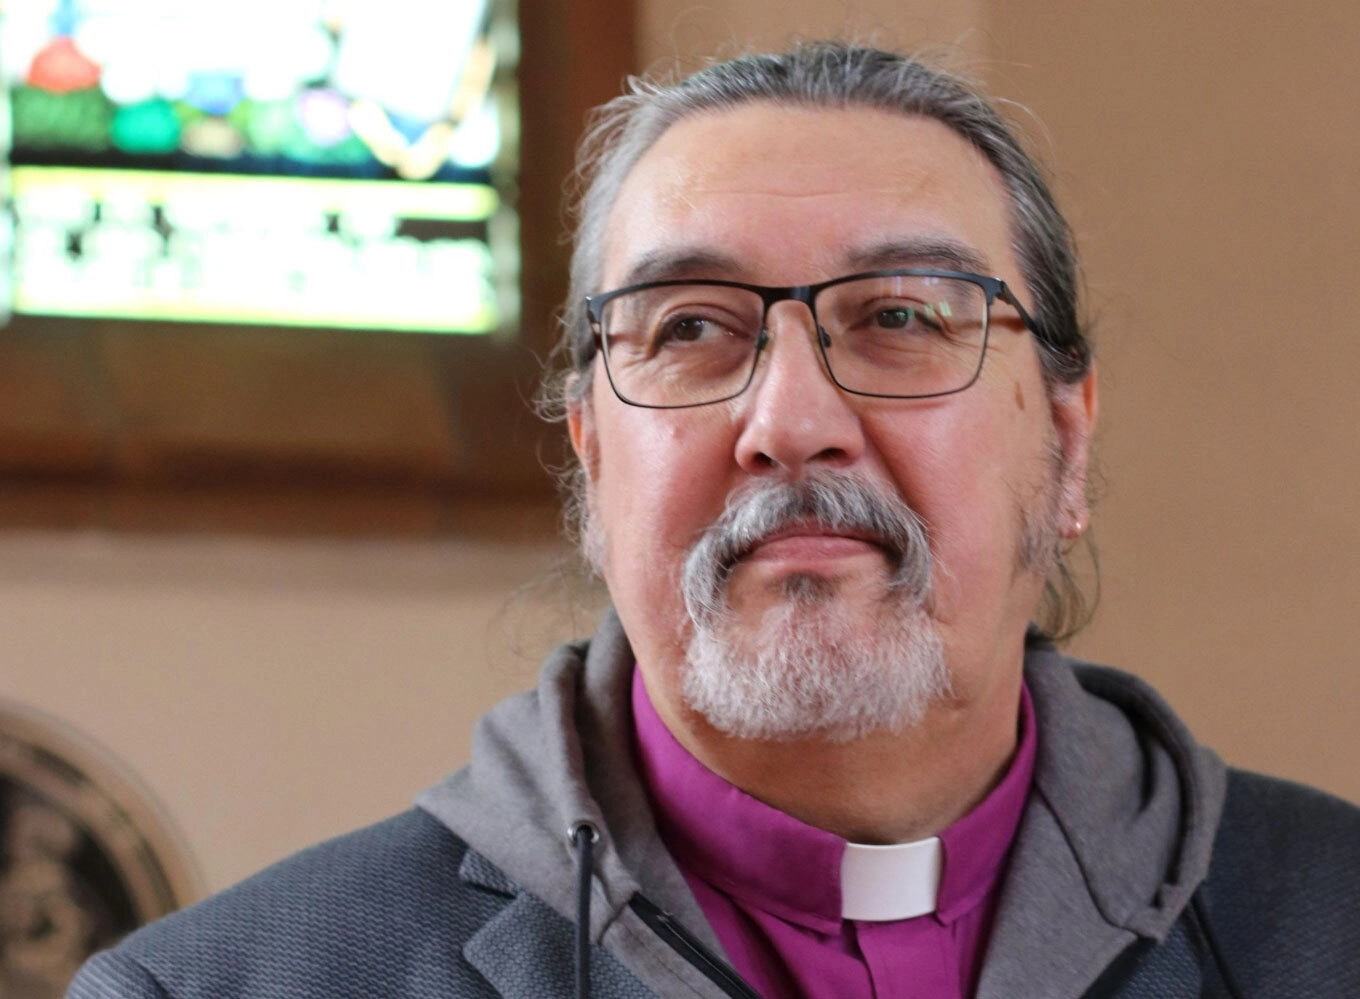 Anglican bishop of Saskatoon, Chris Harper, has been appointed the National Indigenous Archbishop for the Anglican Church of Canada